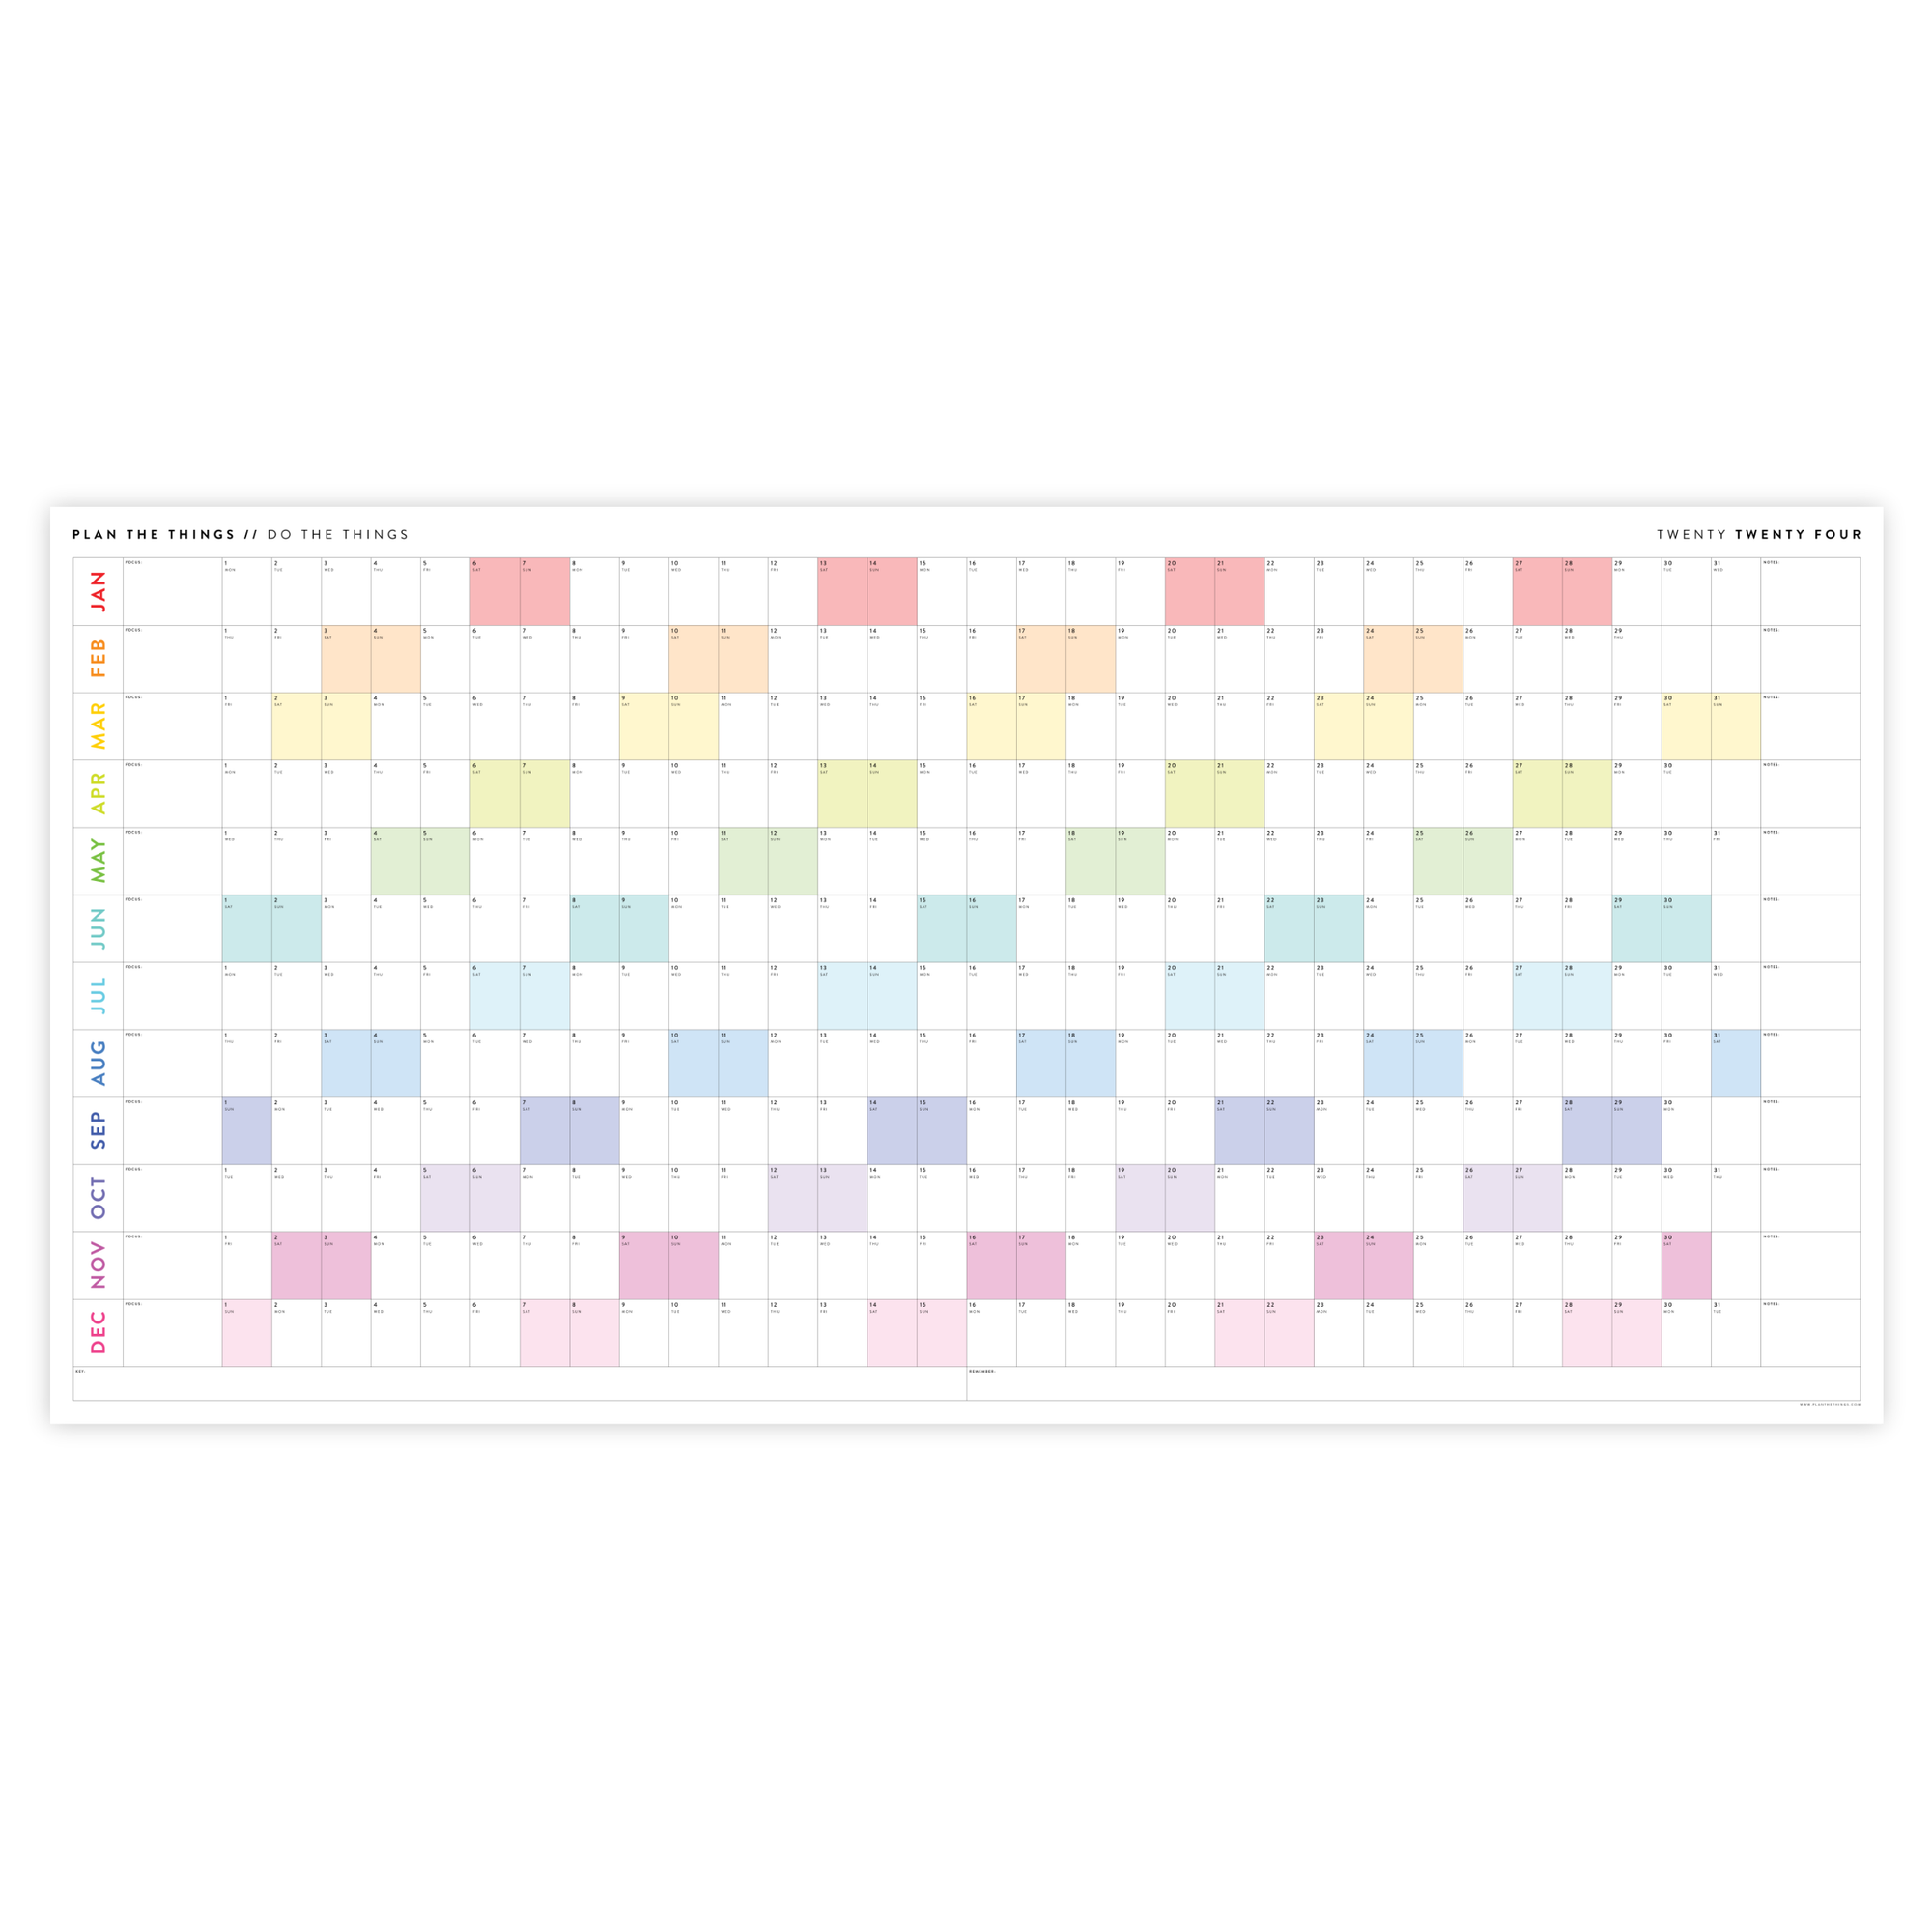 PRINTABLE 6' x 3' MASSIVE 2024 WALL CALENDAR WITH RAINBOW WEEKENDS - INSTANT DOWNLOAD